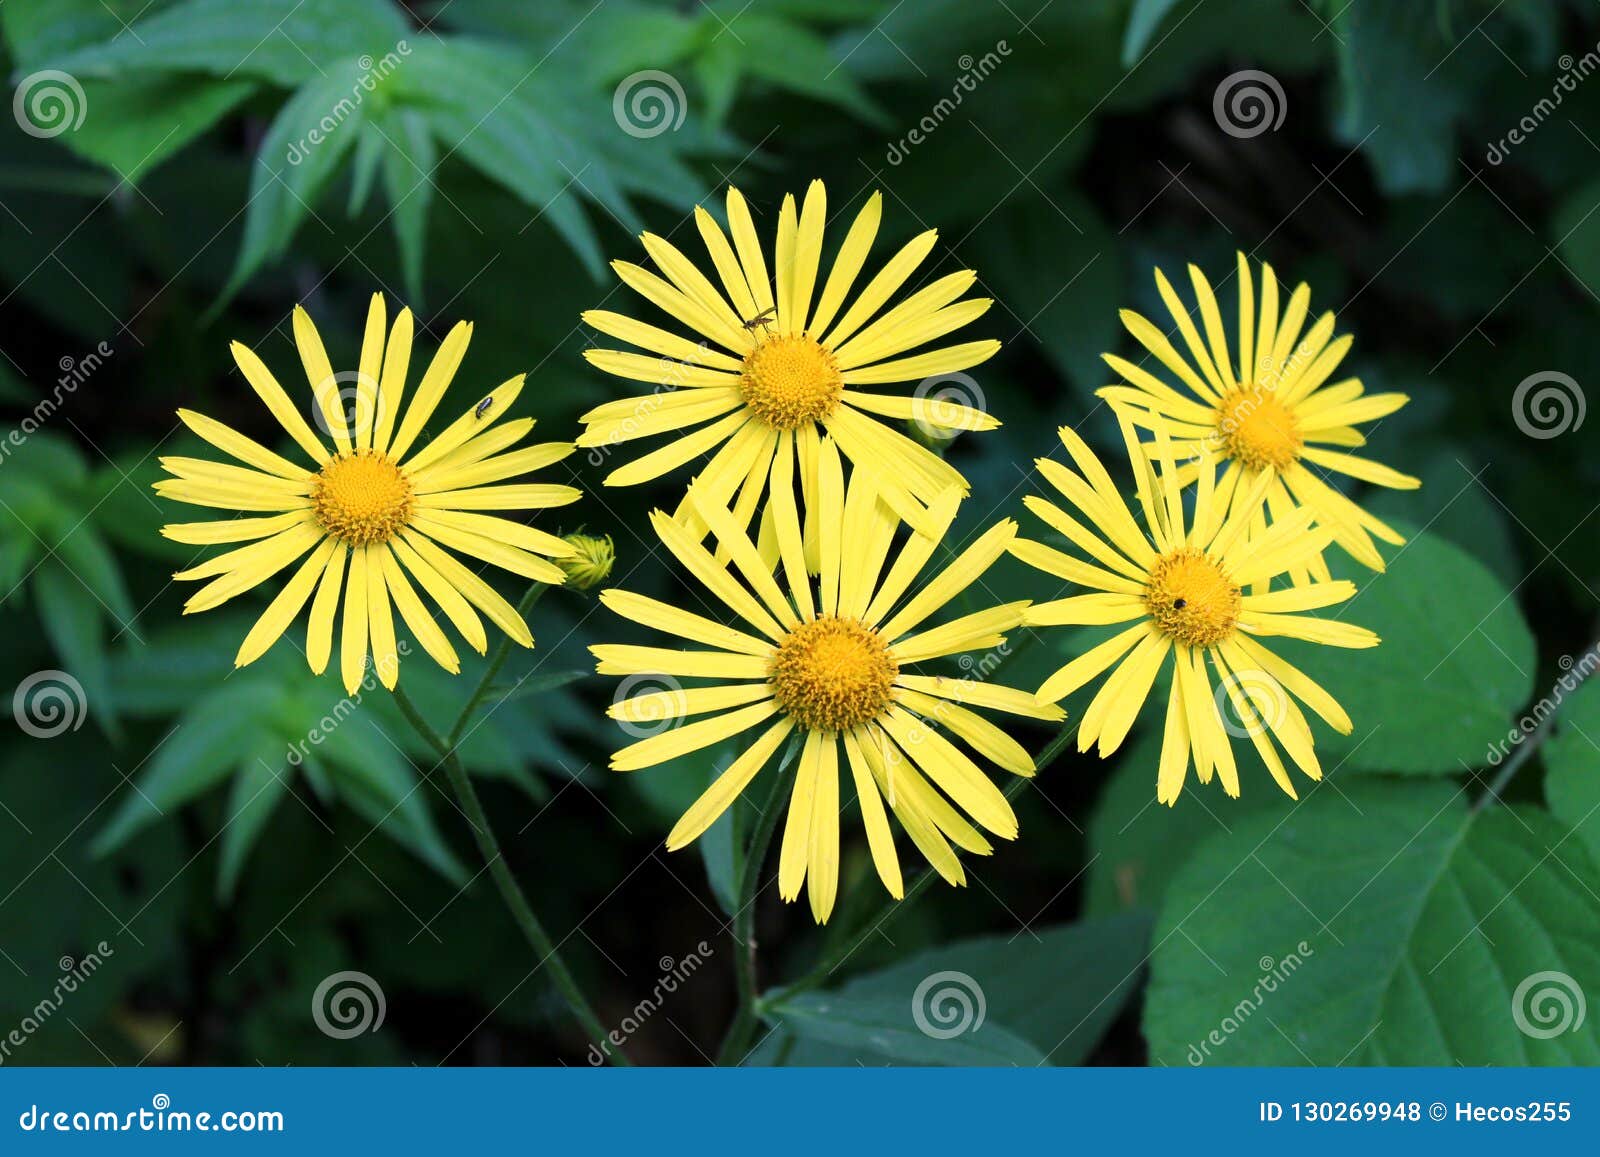 Ox-eye Daisy or Buphthalmum Plant with Flowers Consisting of Bright ...